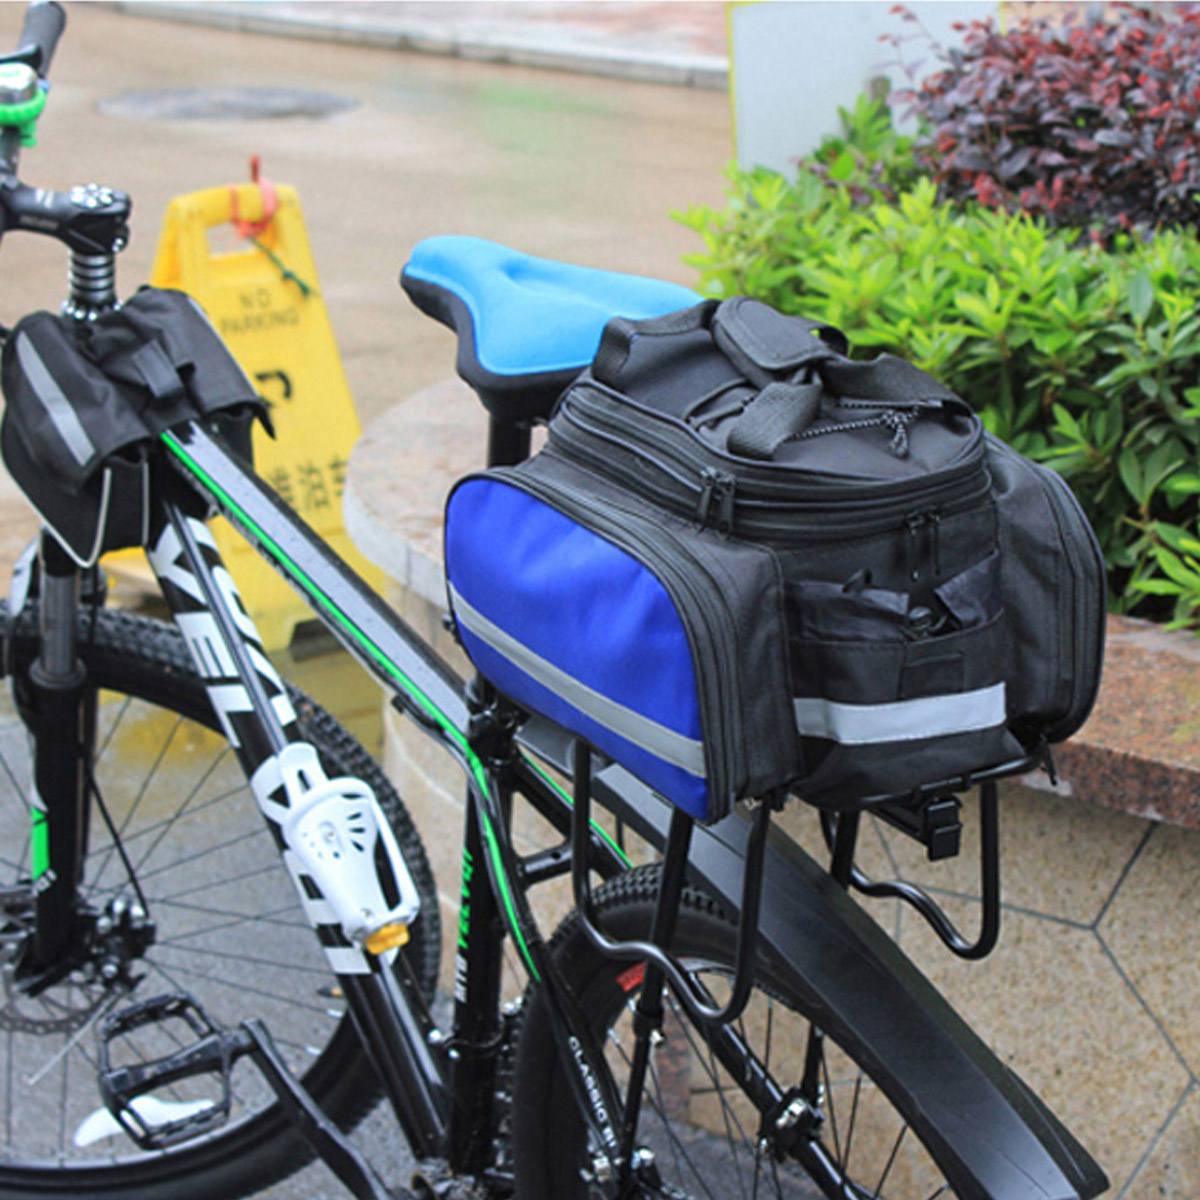 27L-Bicycle-Riding-Package-Large-Capacity-Waterproof-Reflective-Strips-Outdoor-Riding-Bag-1874551-5